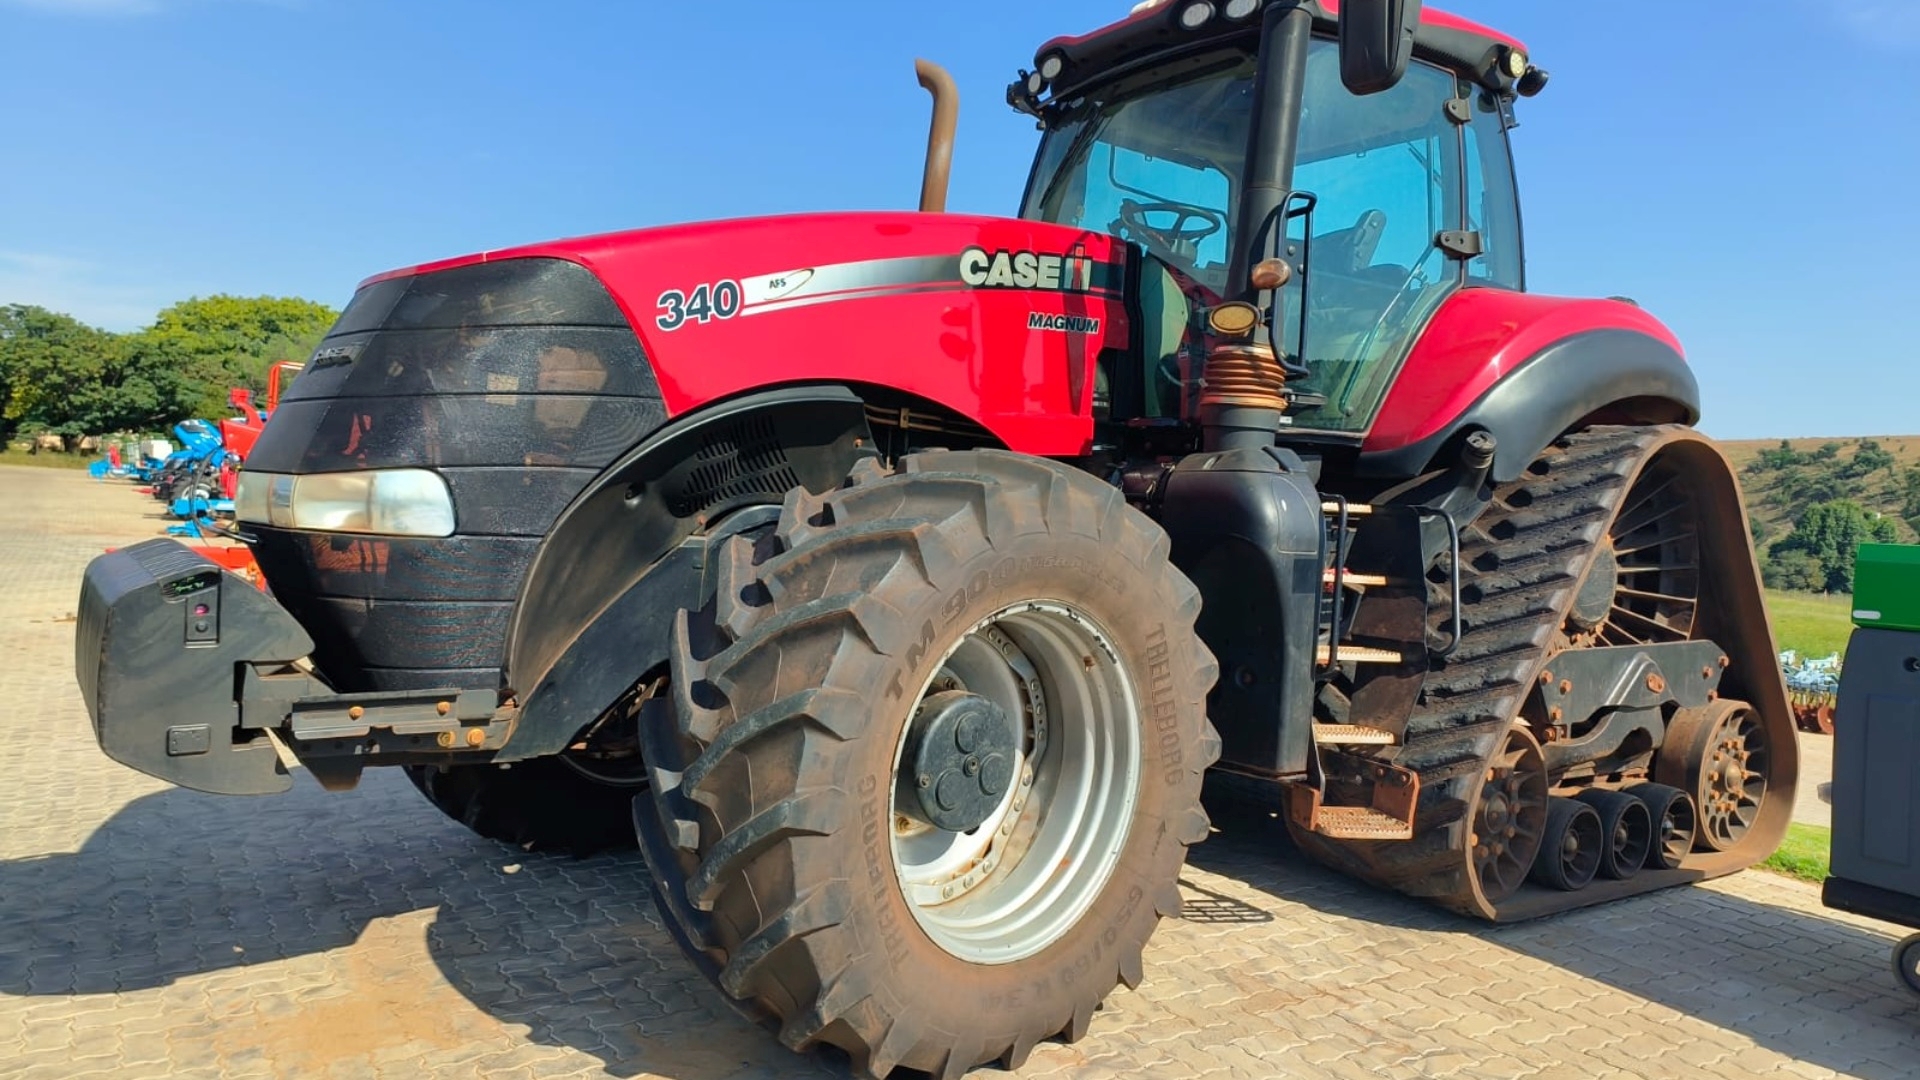 Used 2017 340 Magnum Row Trac with GPS for sale in Gauteng | R 2,190,000